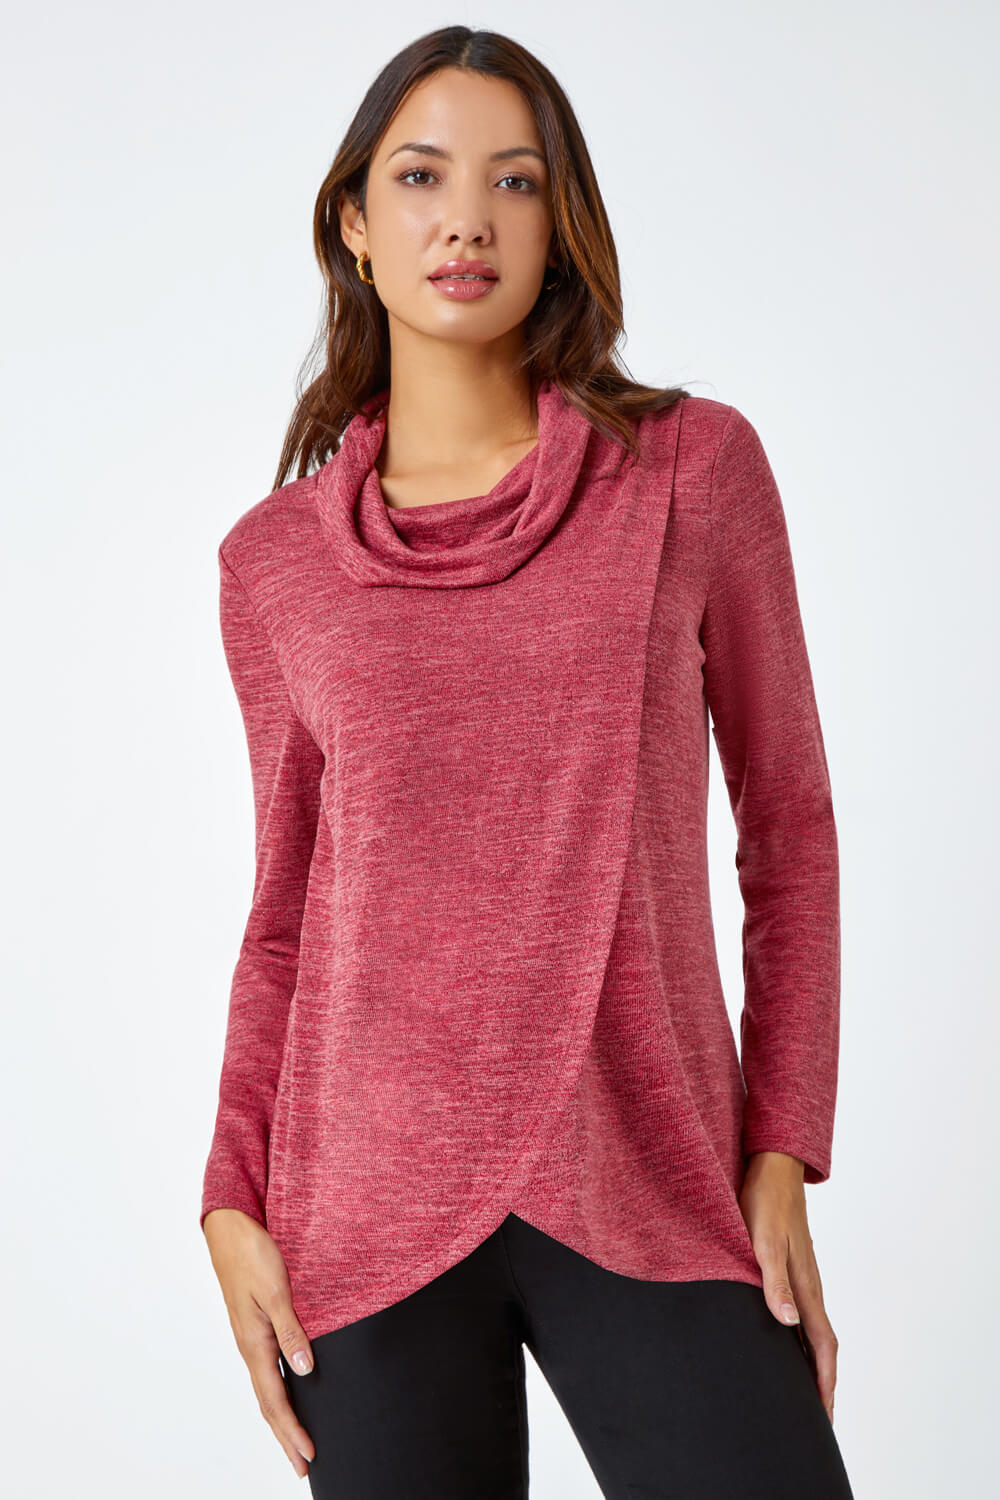 Wrap Front Cowl Neck Stretch Top